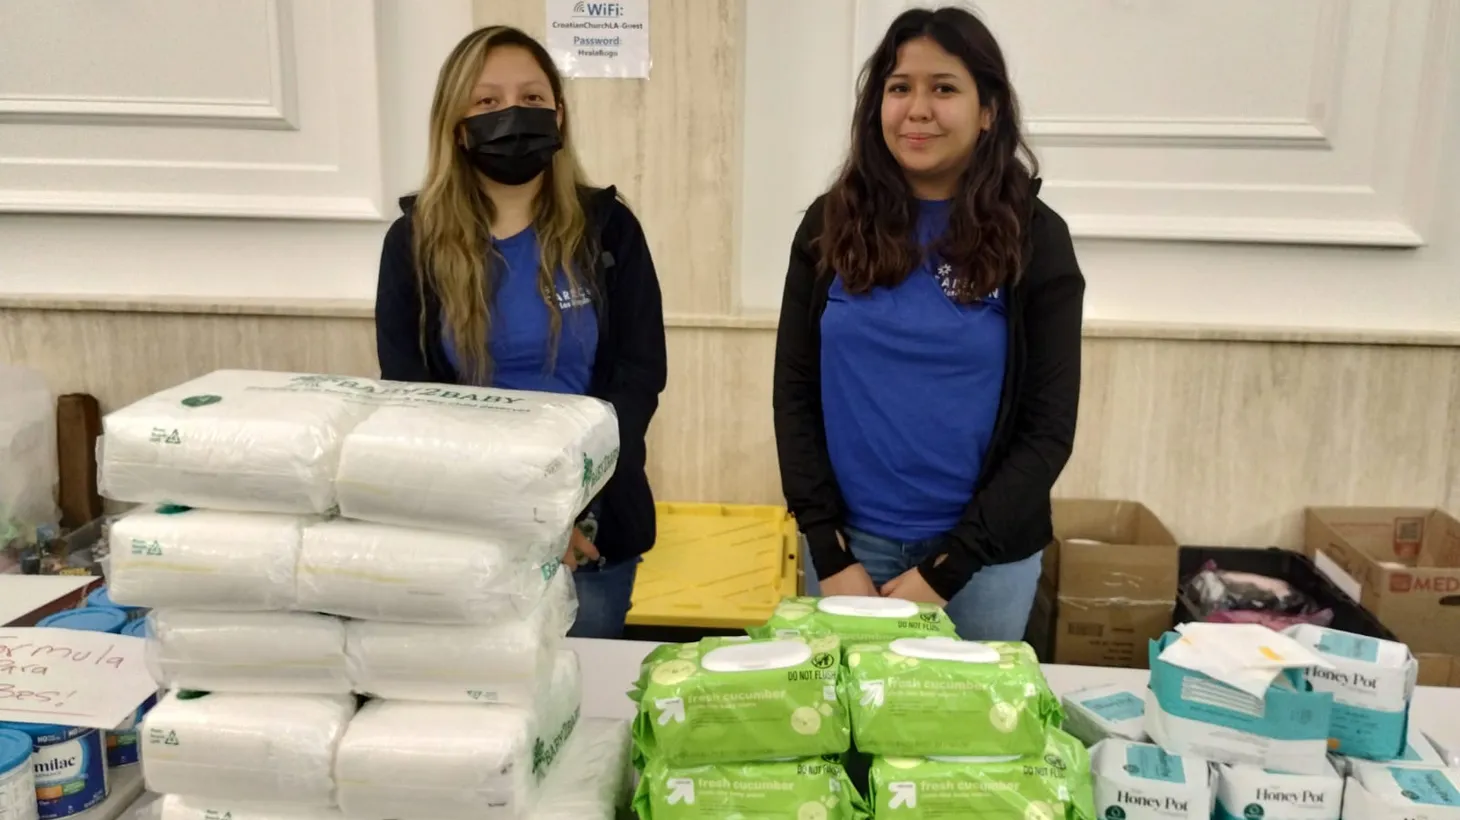 Volunteers welcome asylum seekers with hygiene articles, food, and medical resources.